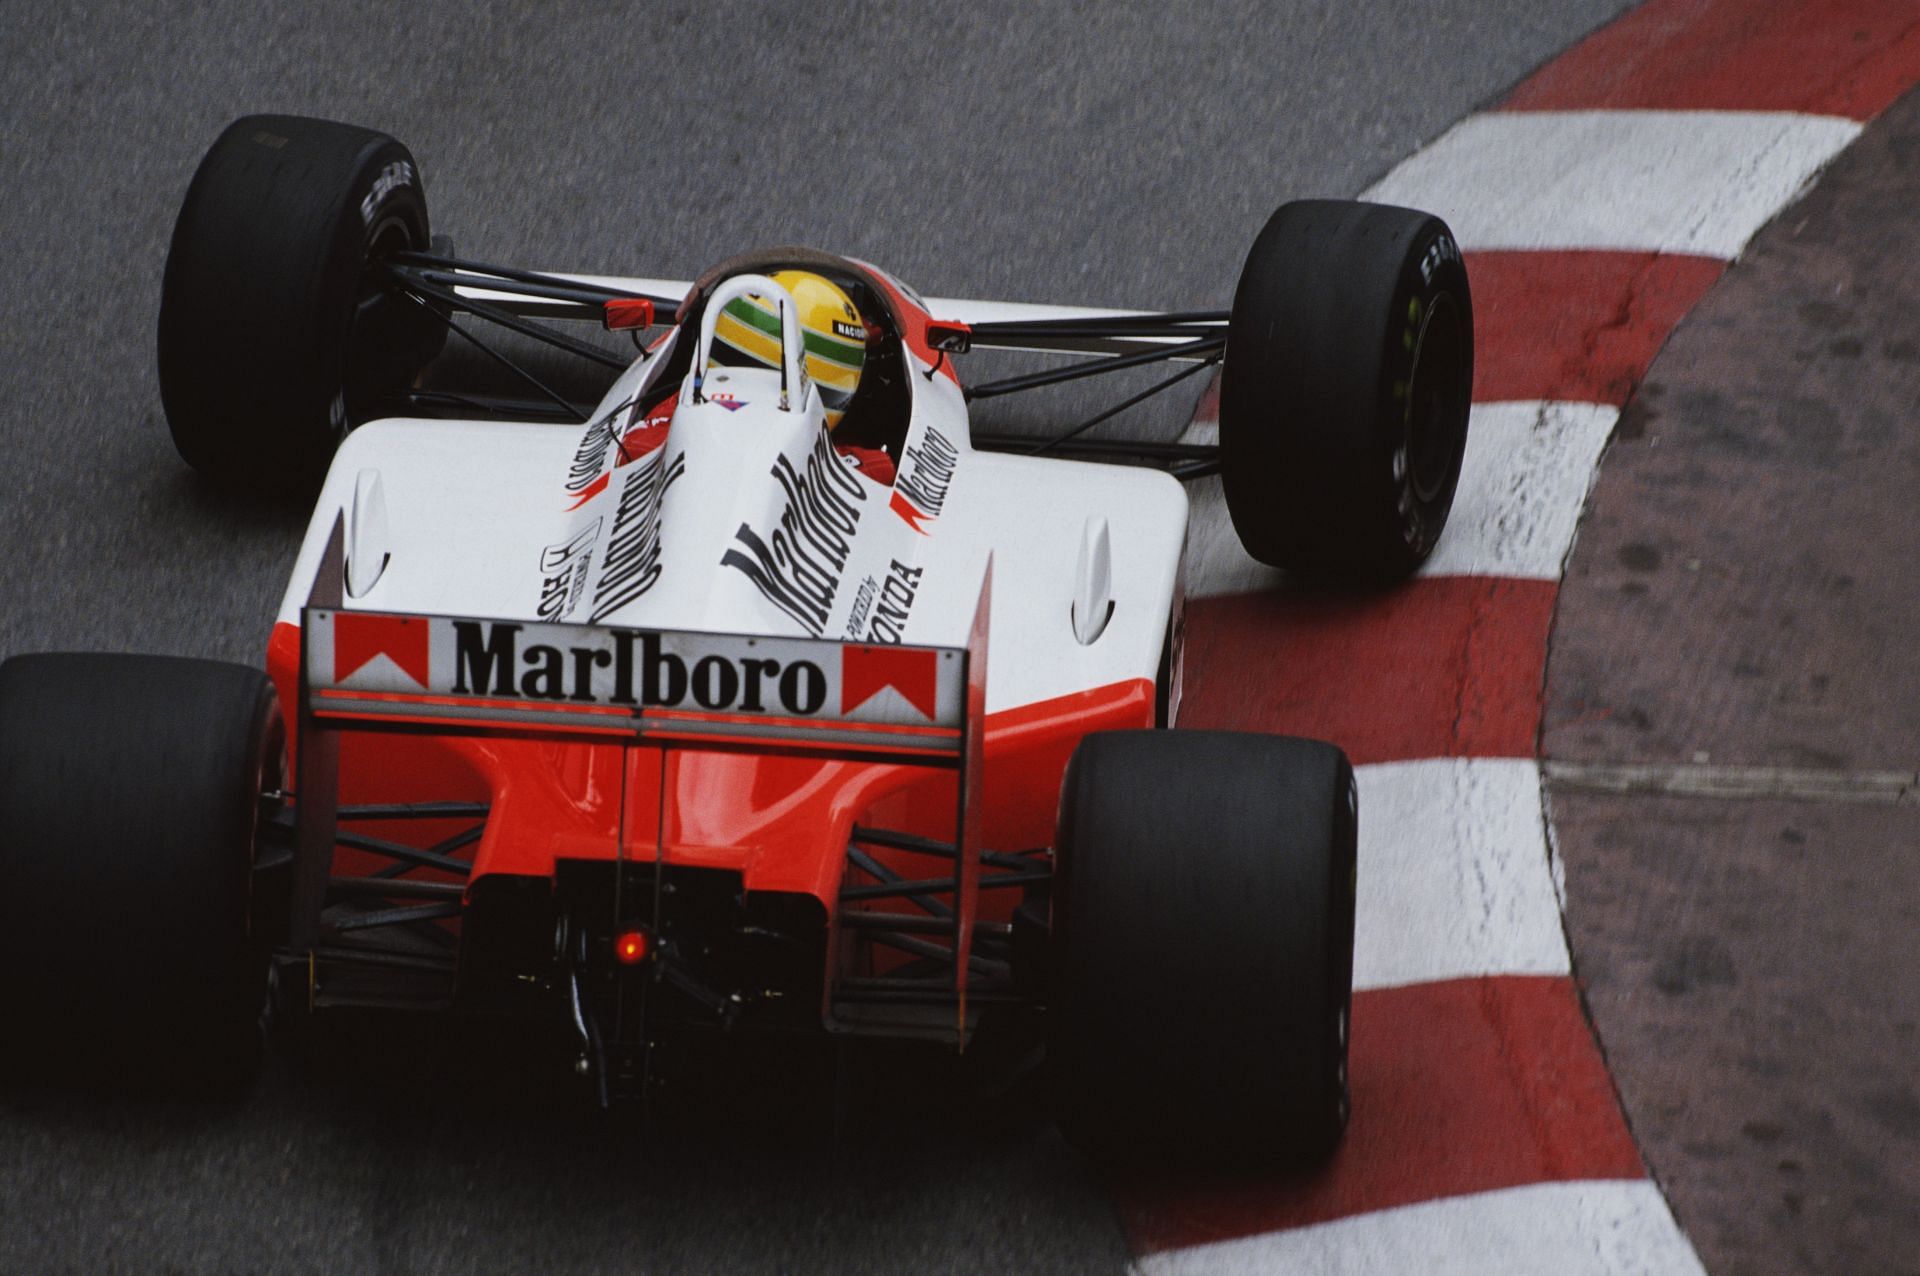 Grand Prix of Monaco - Ayrton Senna takes a right-hander (Photo by Oli Tennent/Getty Images)